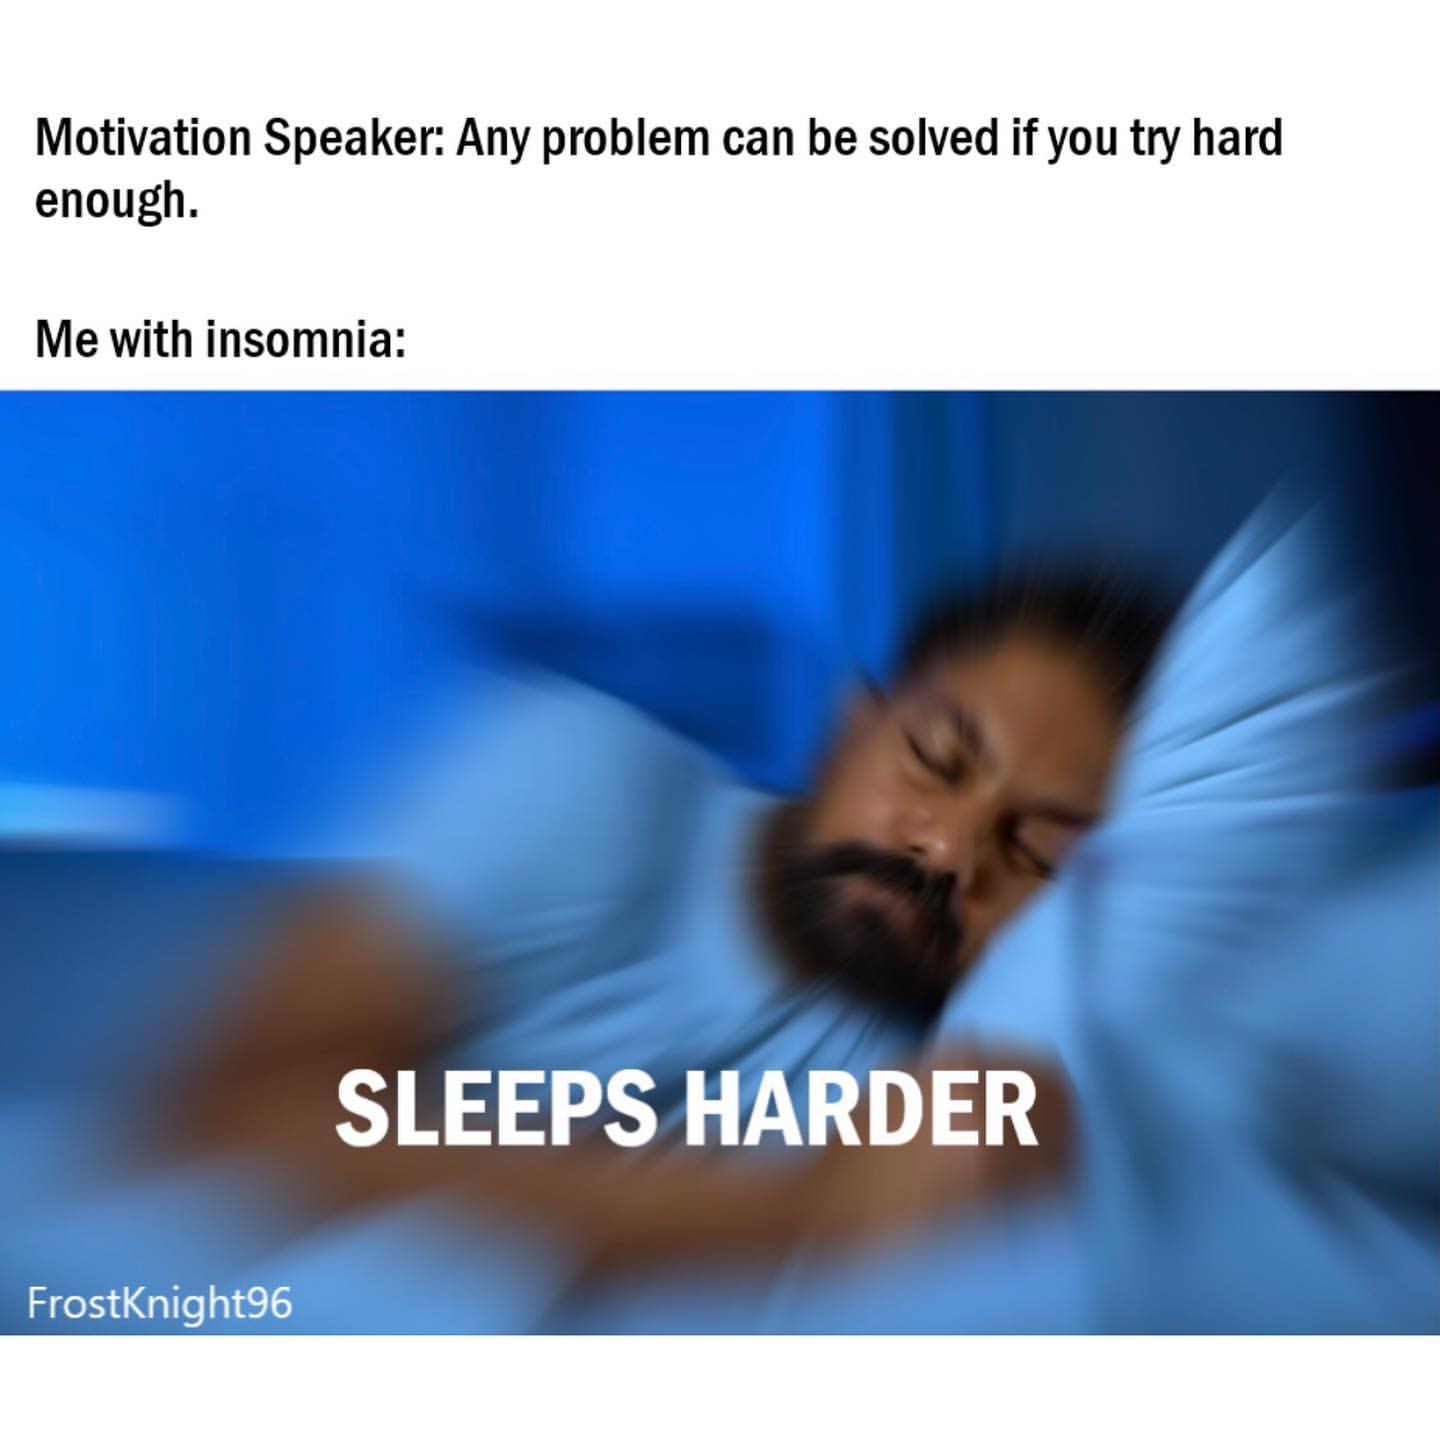 Motivation Speaker: Any problem can be solved if you try hard enough. Me with insomnia: Sleeps harder.